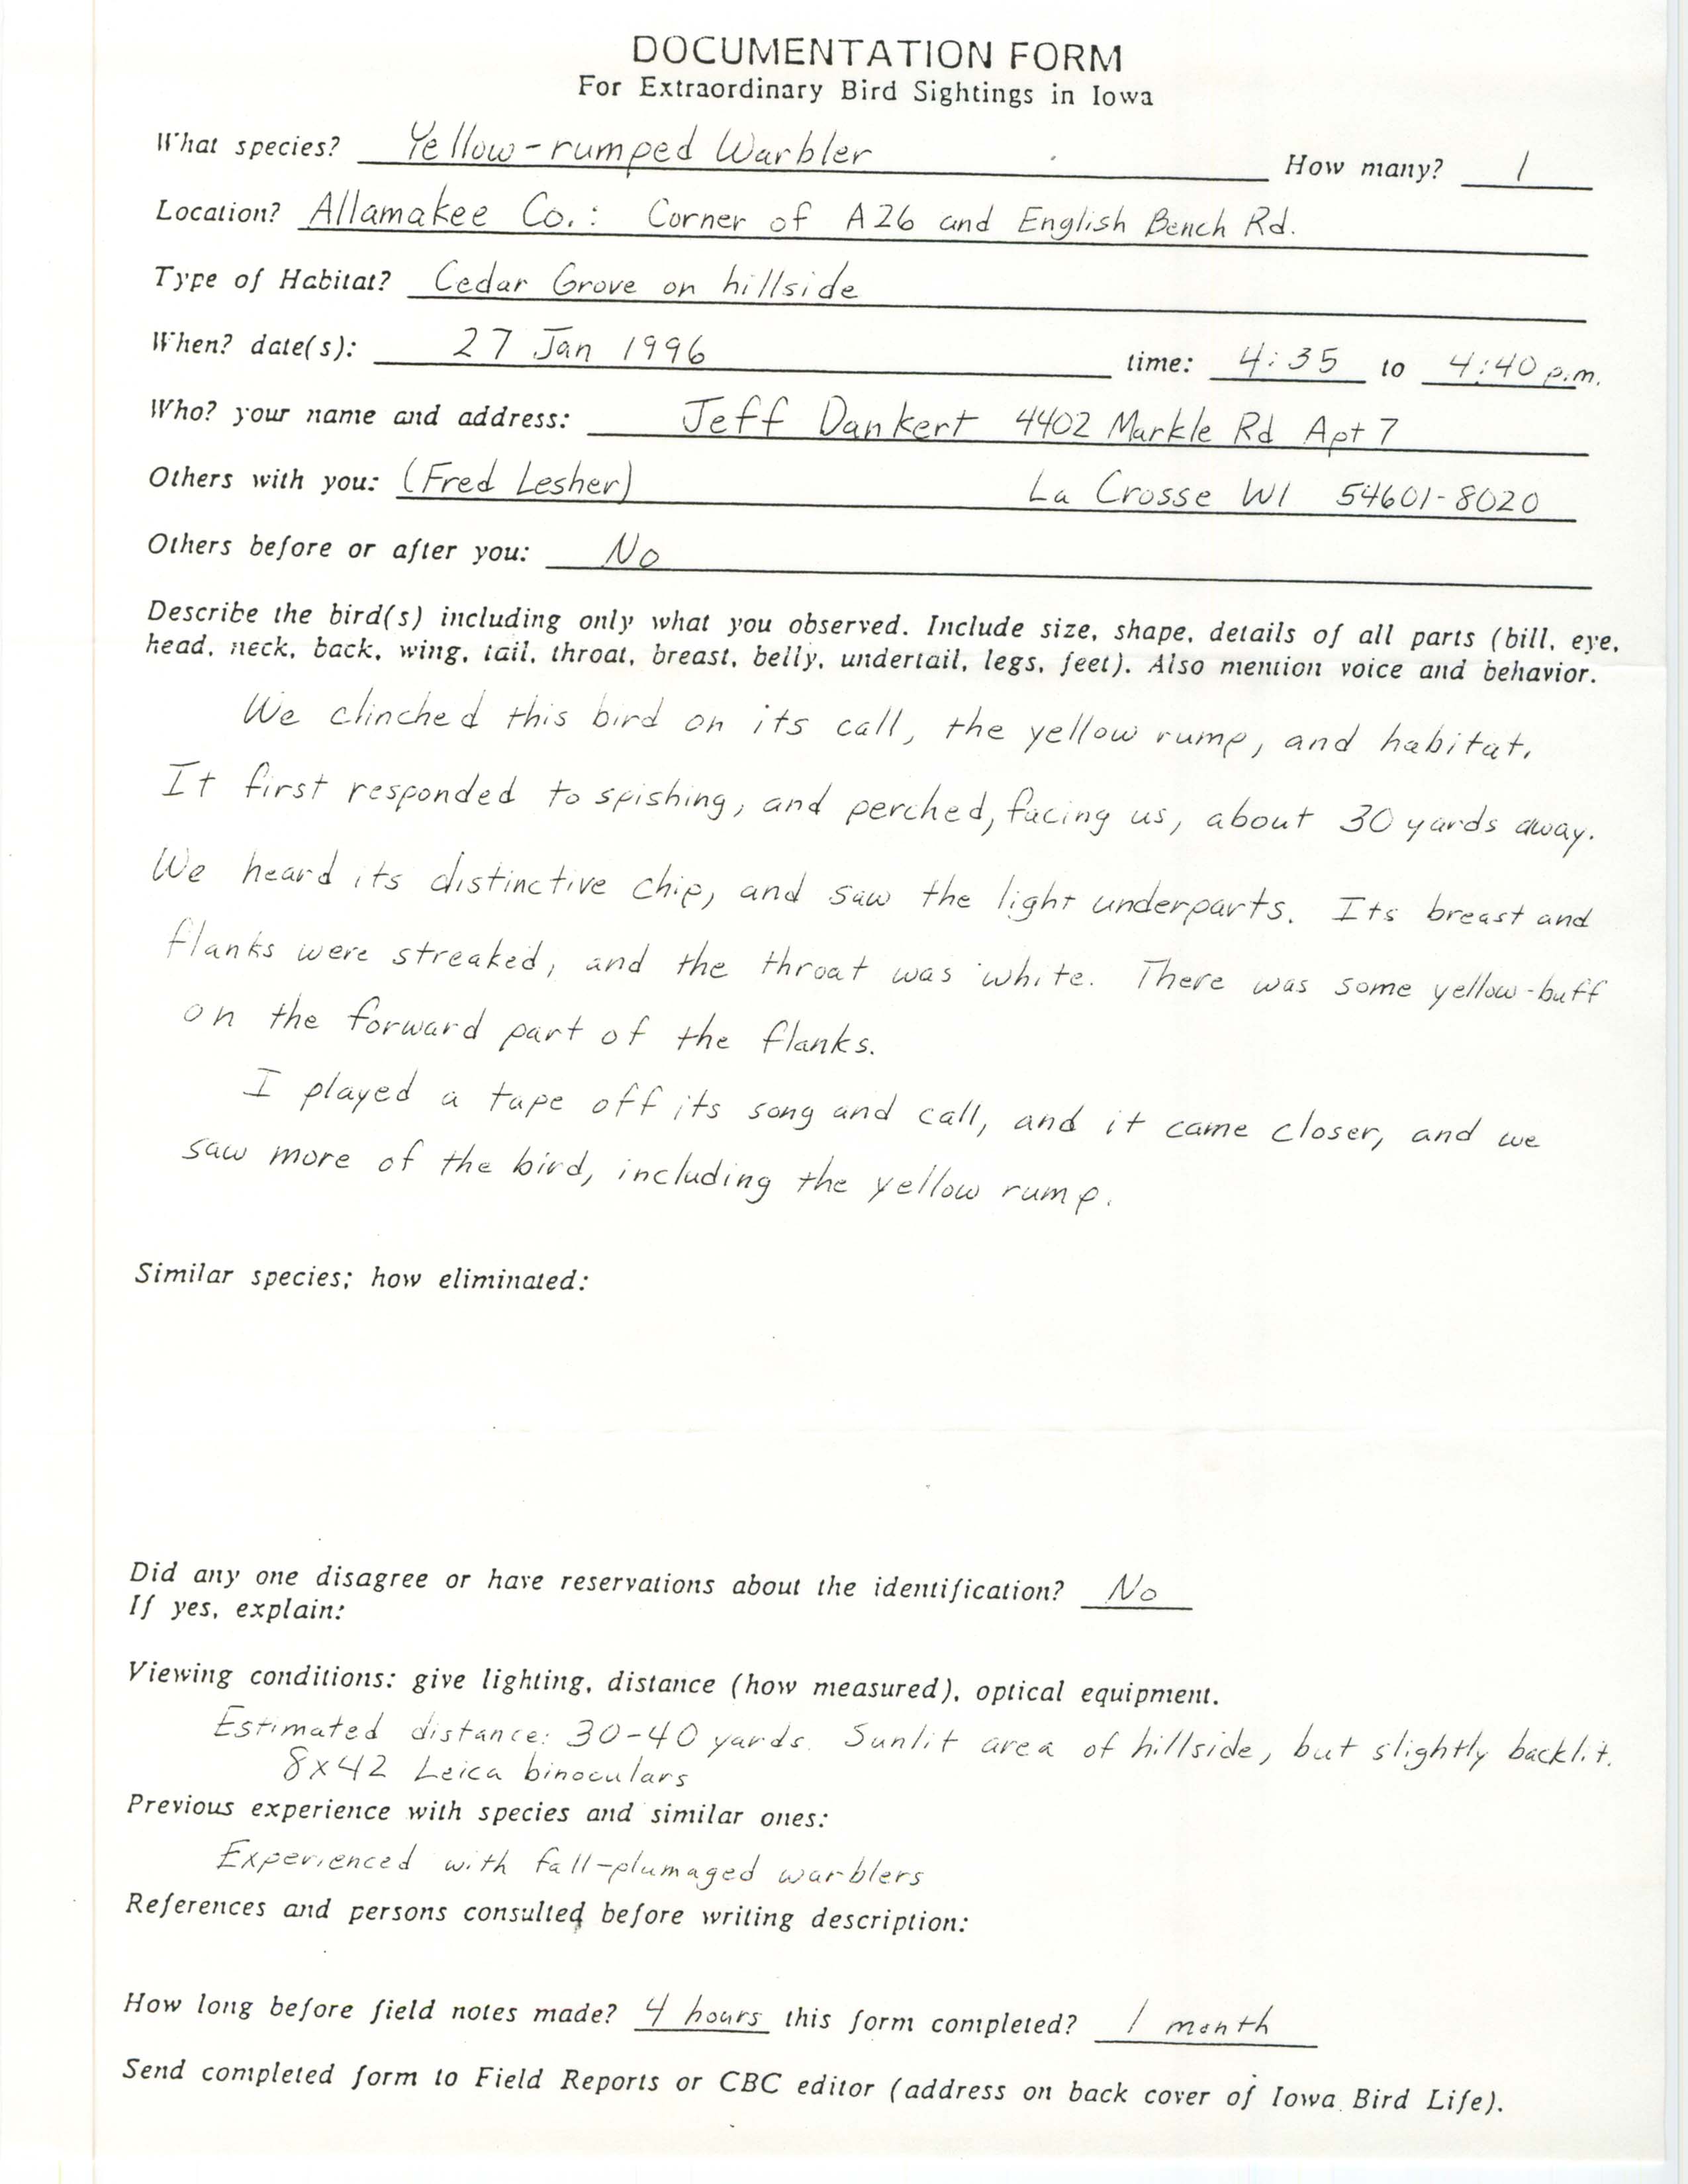 Rare bird documentation form for Yellow-rumped Warbler at Union City Township in Allamakee County, 1996